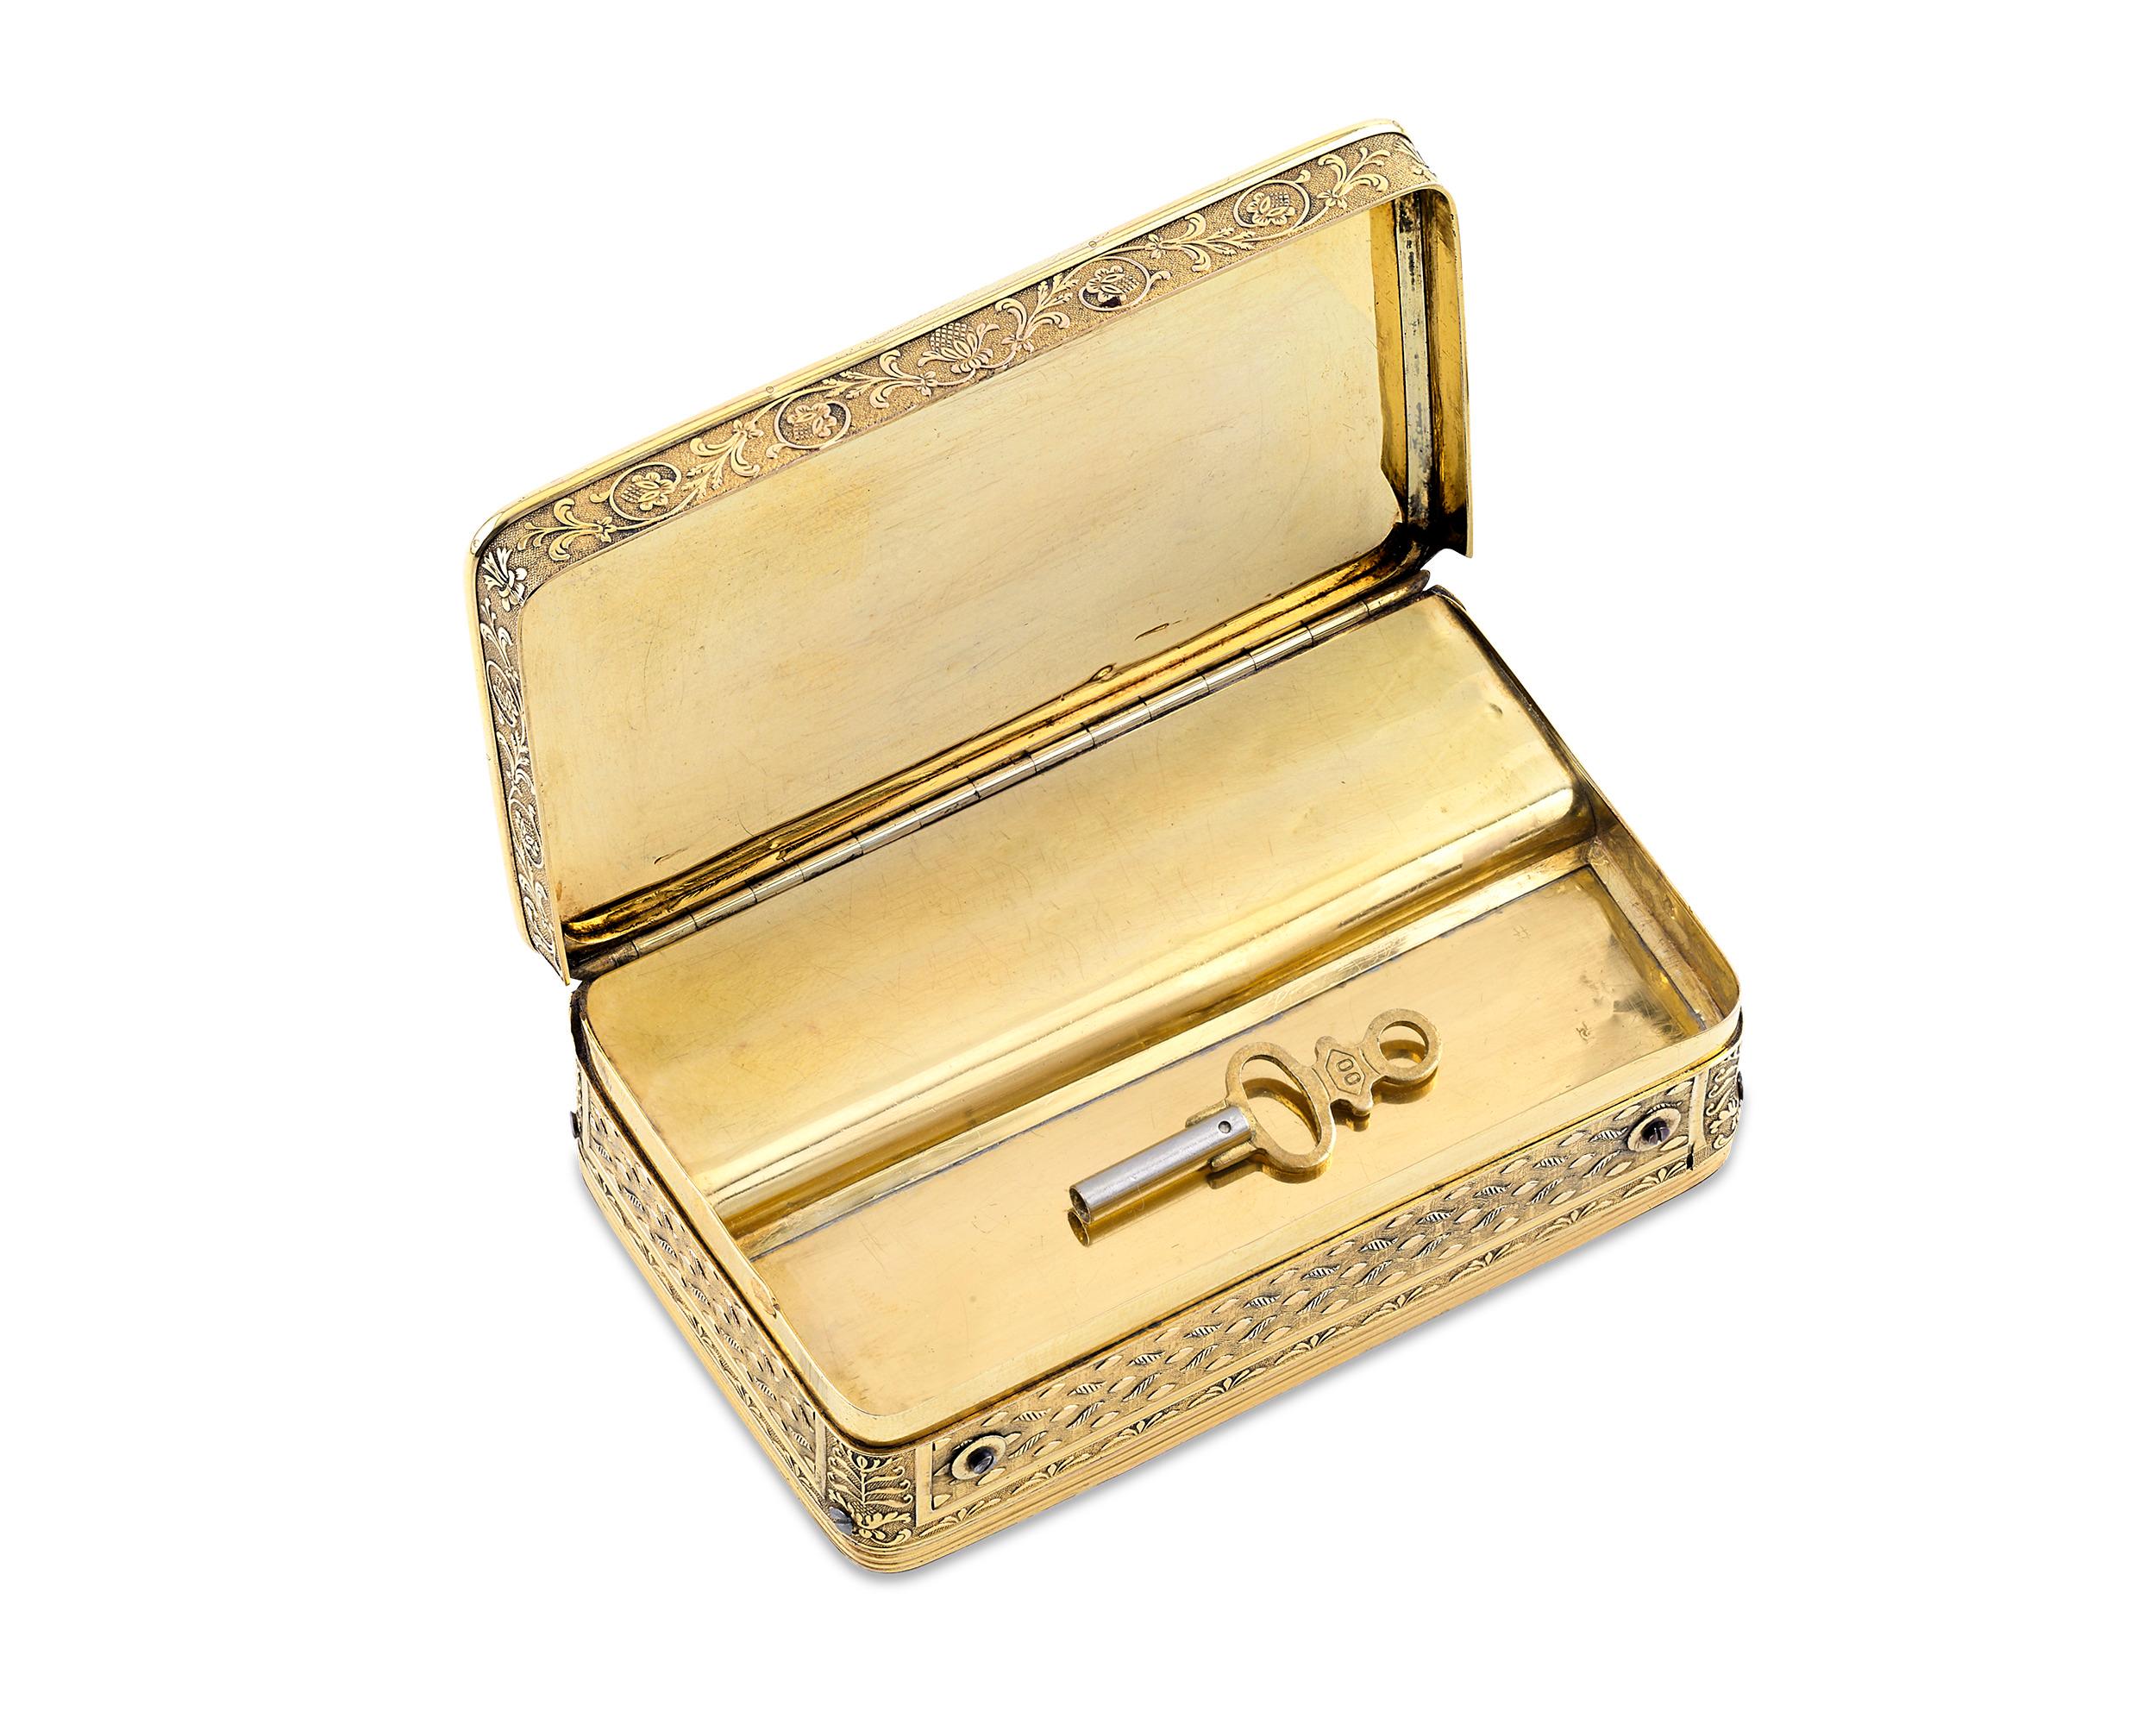 This exceptional Swiss silver-gilt musical snuff box was crafted by the famed François Nicole. At first glance, the diminutive piece appears to simply be an exquisite 19th-century snuff box, with Neoclassical-style chased and engraved borders of